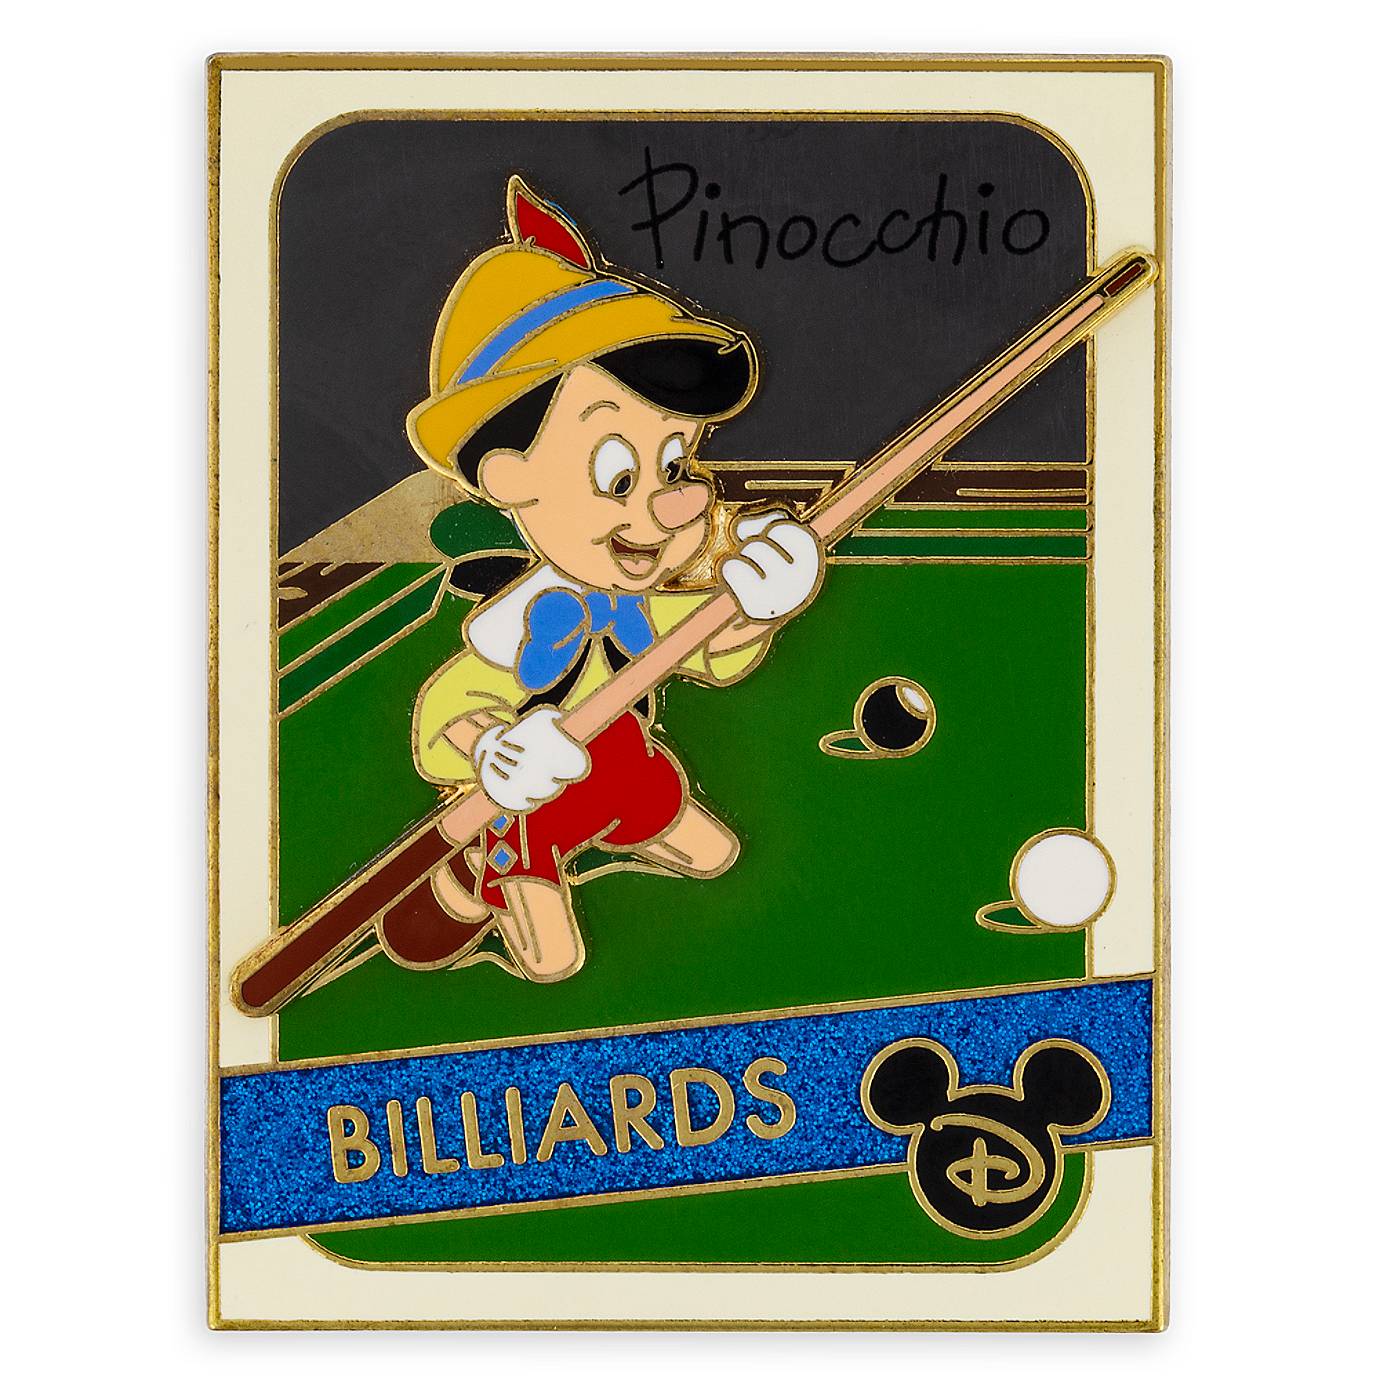 Disney Pinocchio Pin Trading Cards: Billiards Limited Edition New with Card